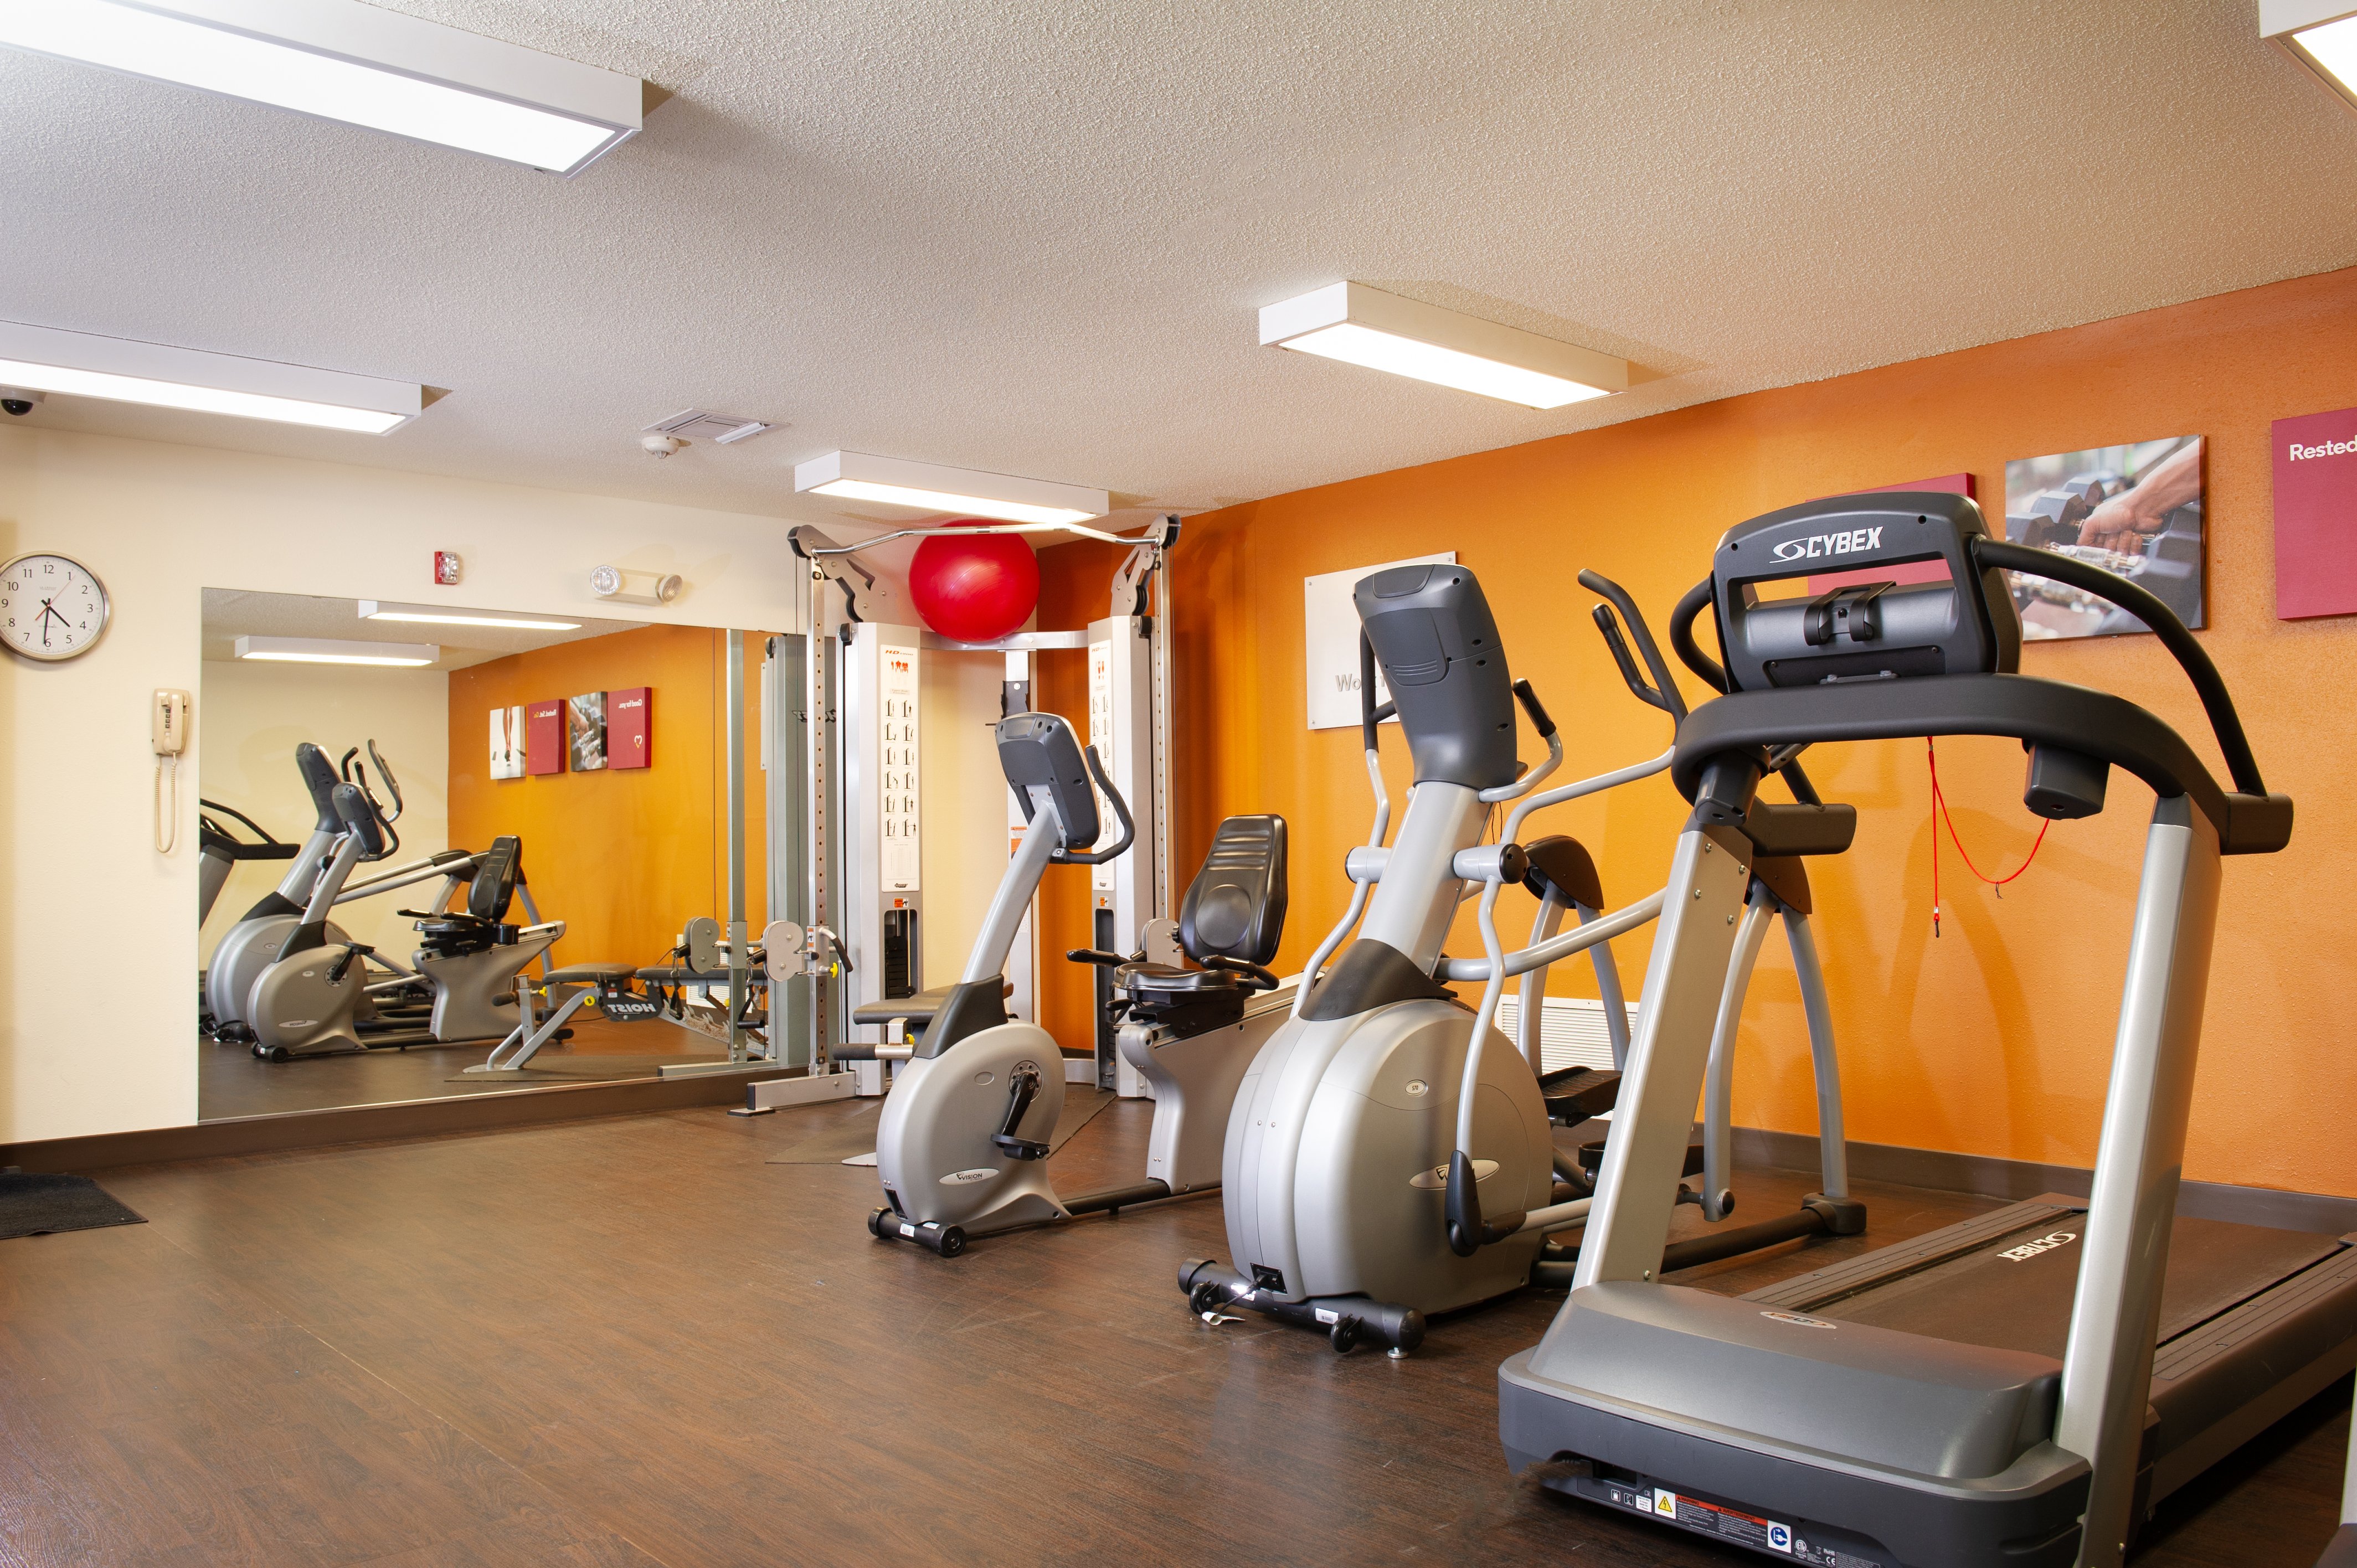 Utilize state of the art equipment at our spacious fitness center